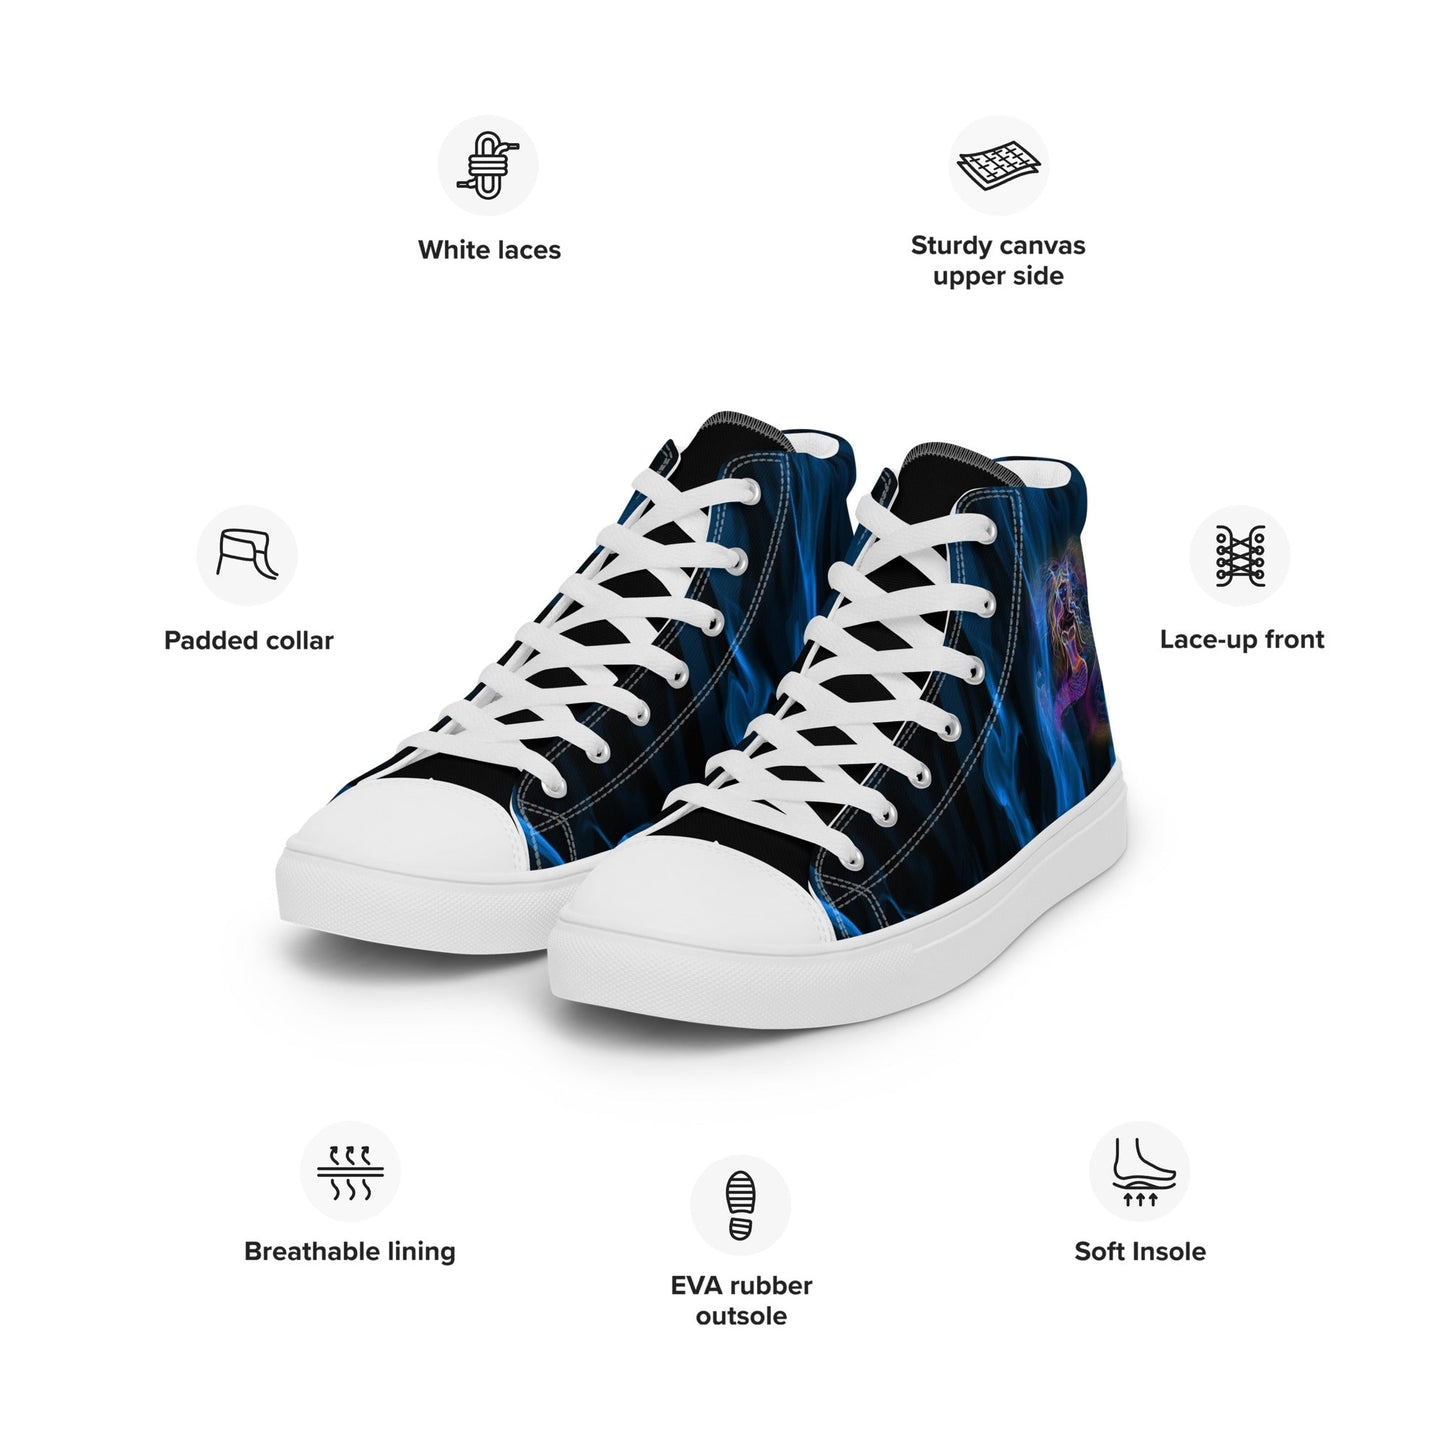 Crazy Siren in the Depth high top canvas shoes